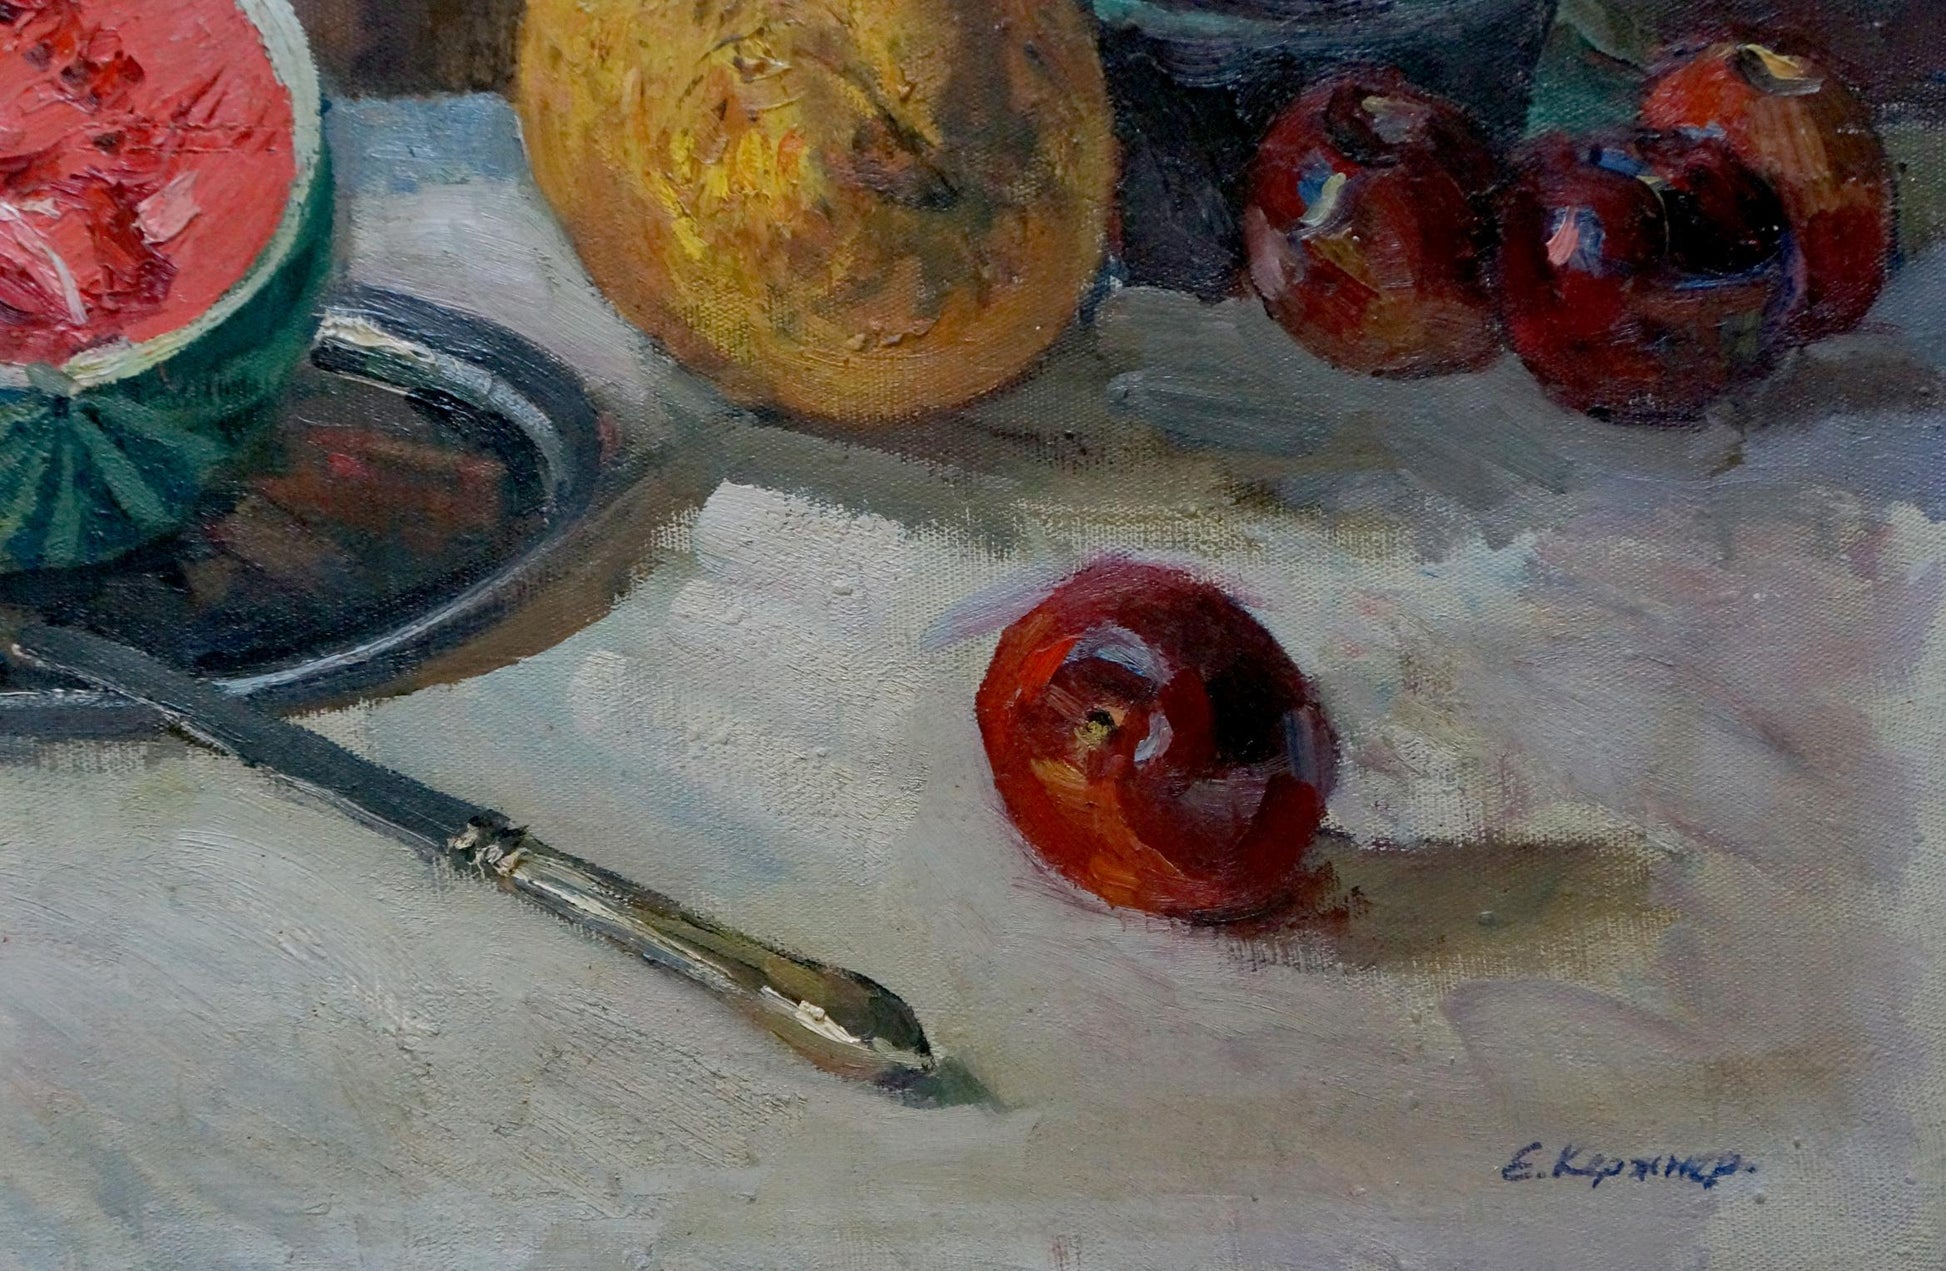 Still Life with Watermelon, an oil painting by Efim Aleksandrovich Kerzhner